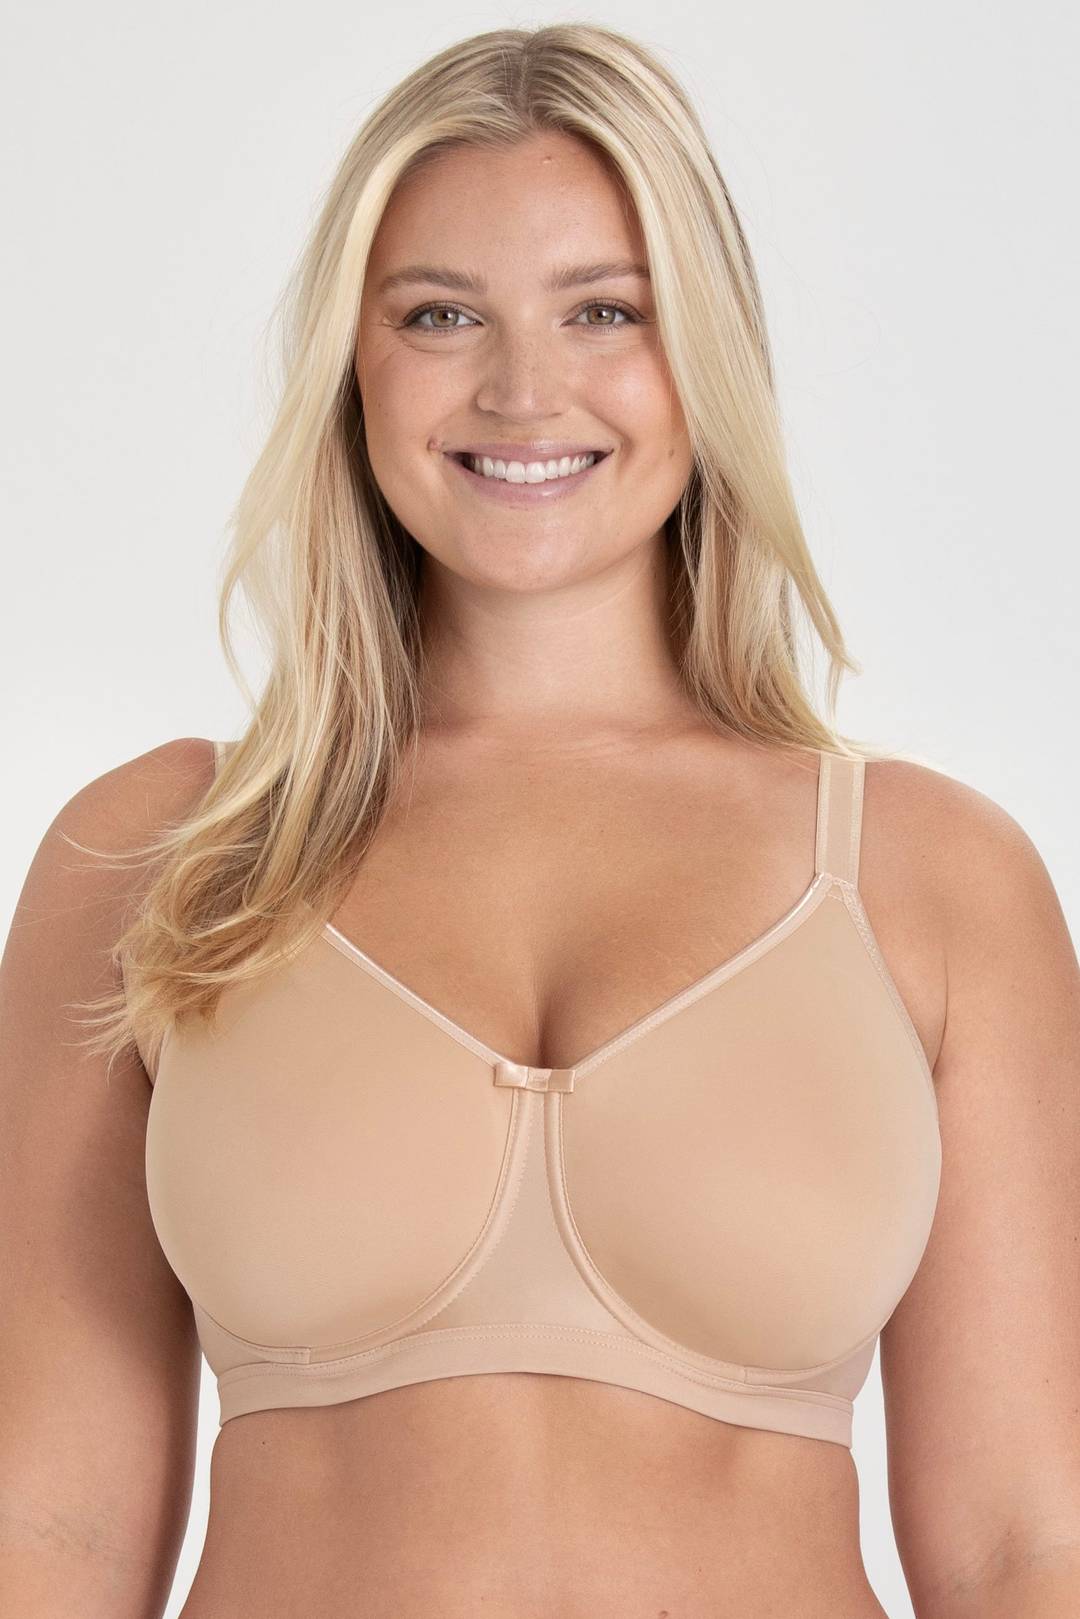 The art of creating comfort with Miss Mary's own bra expert